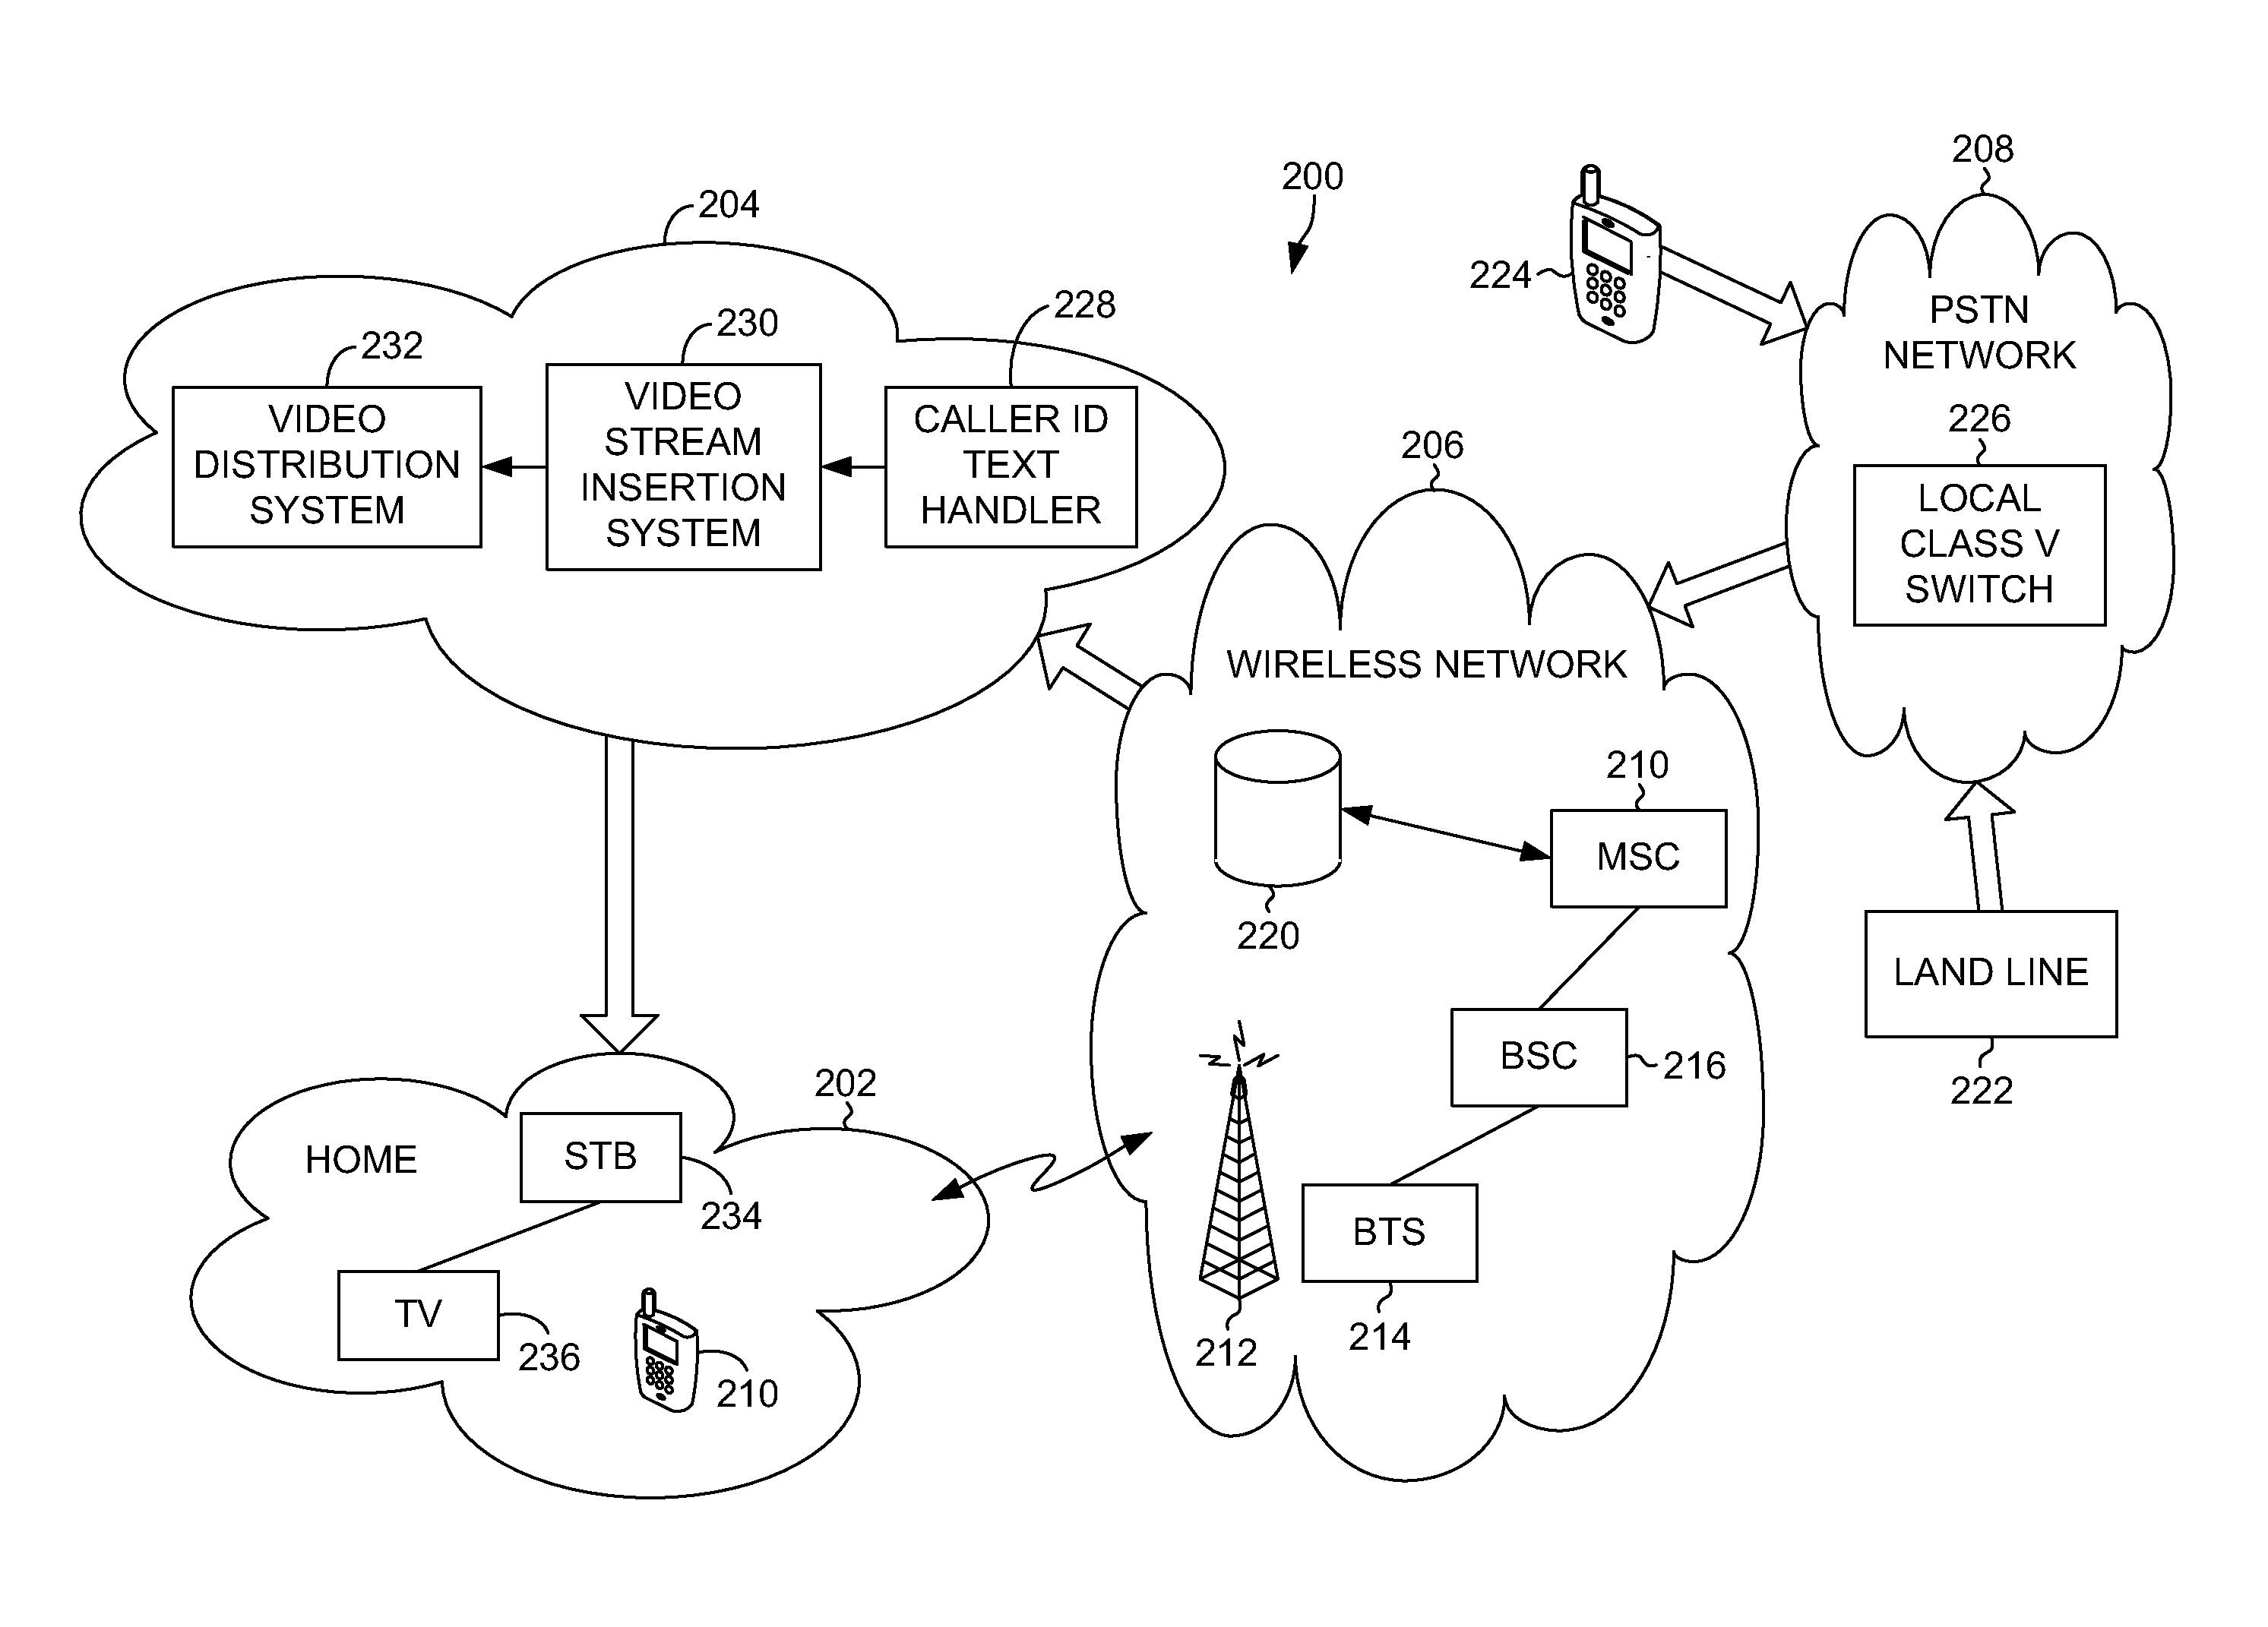 Caller ID handling system for calls placed to a mobile phone